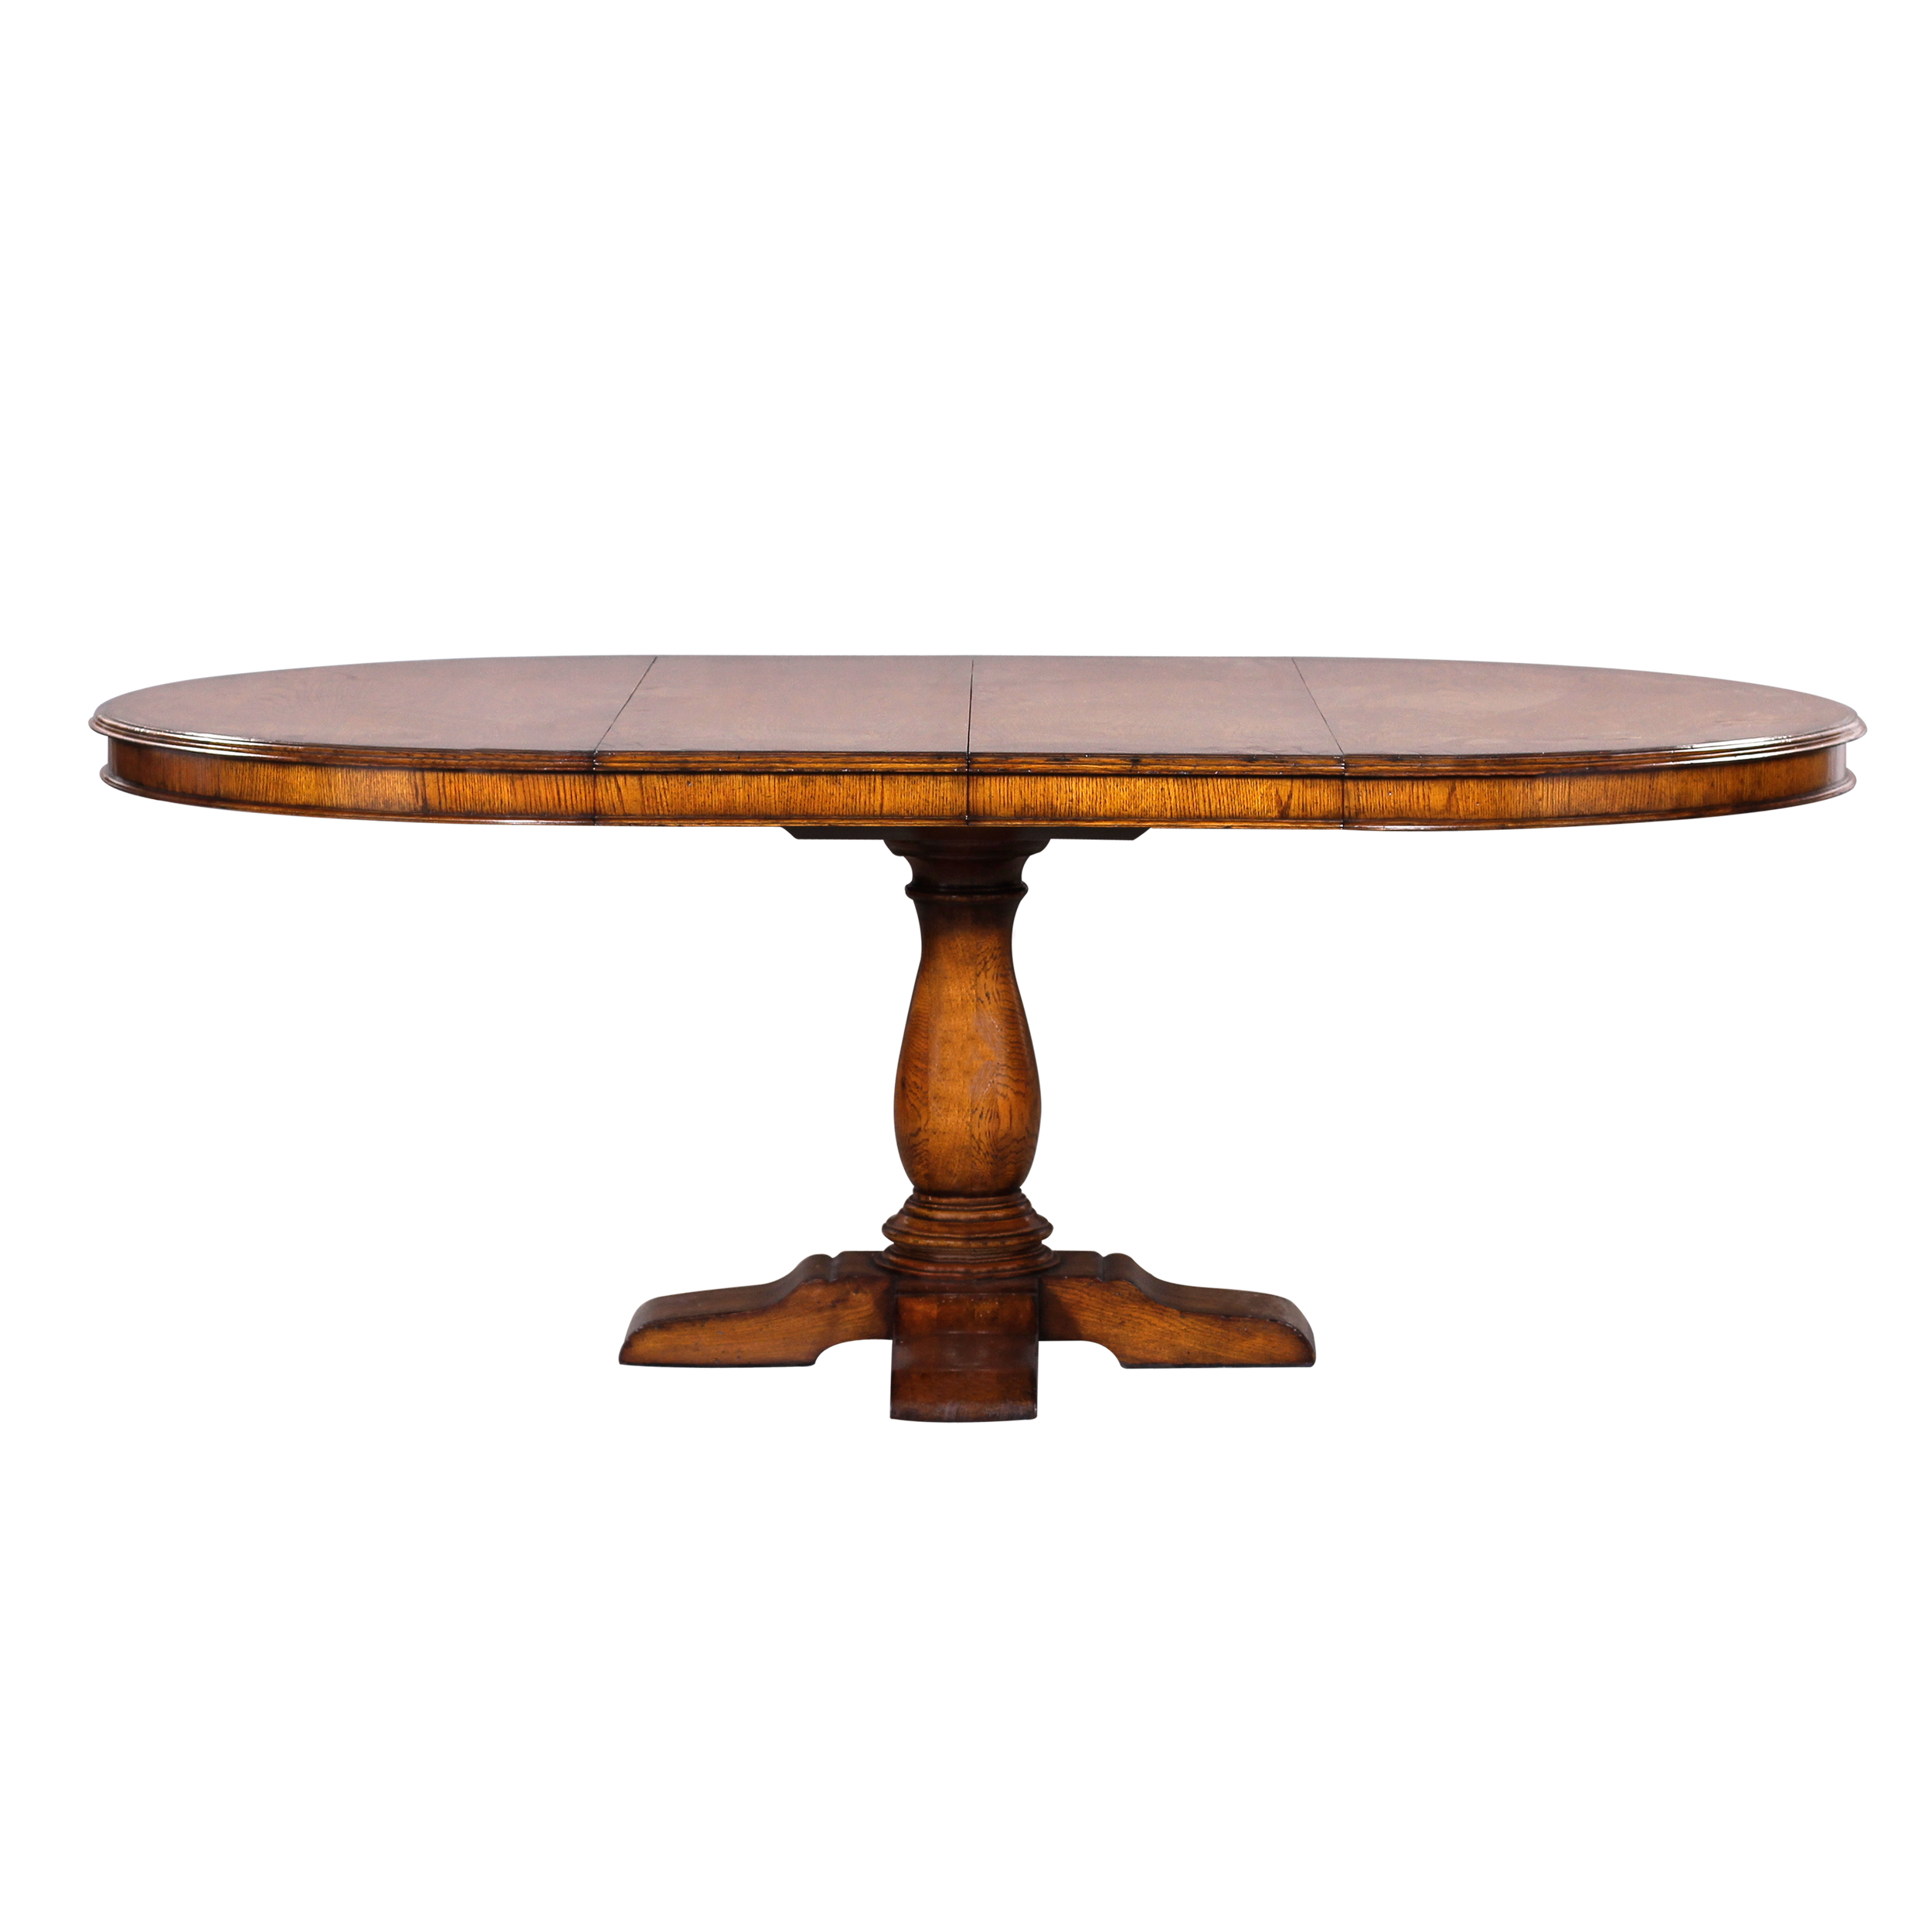 34621Oak---Round-Table-Oak-with-2-Leaves,-OMD,-2